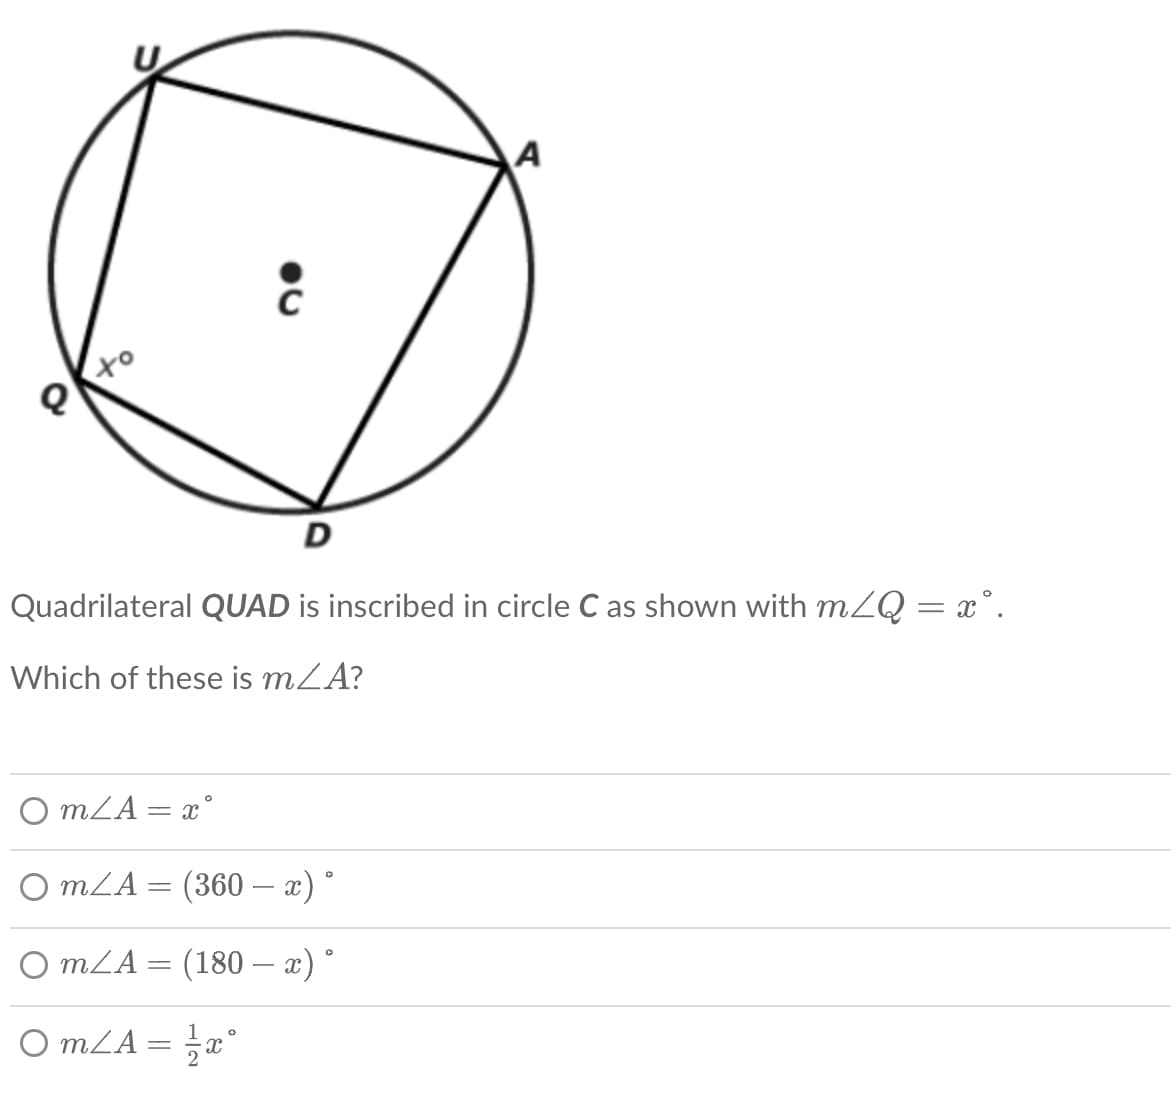 to
D
Quadrilateral QUAD is inscribed in circle C as shown with mZQ = x°.
Which of these is mZA?
mZA= x°
mZA = (360 – x)°
O mLA = (180 – x) °
O mLA = x°
